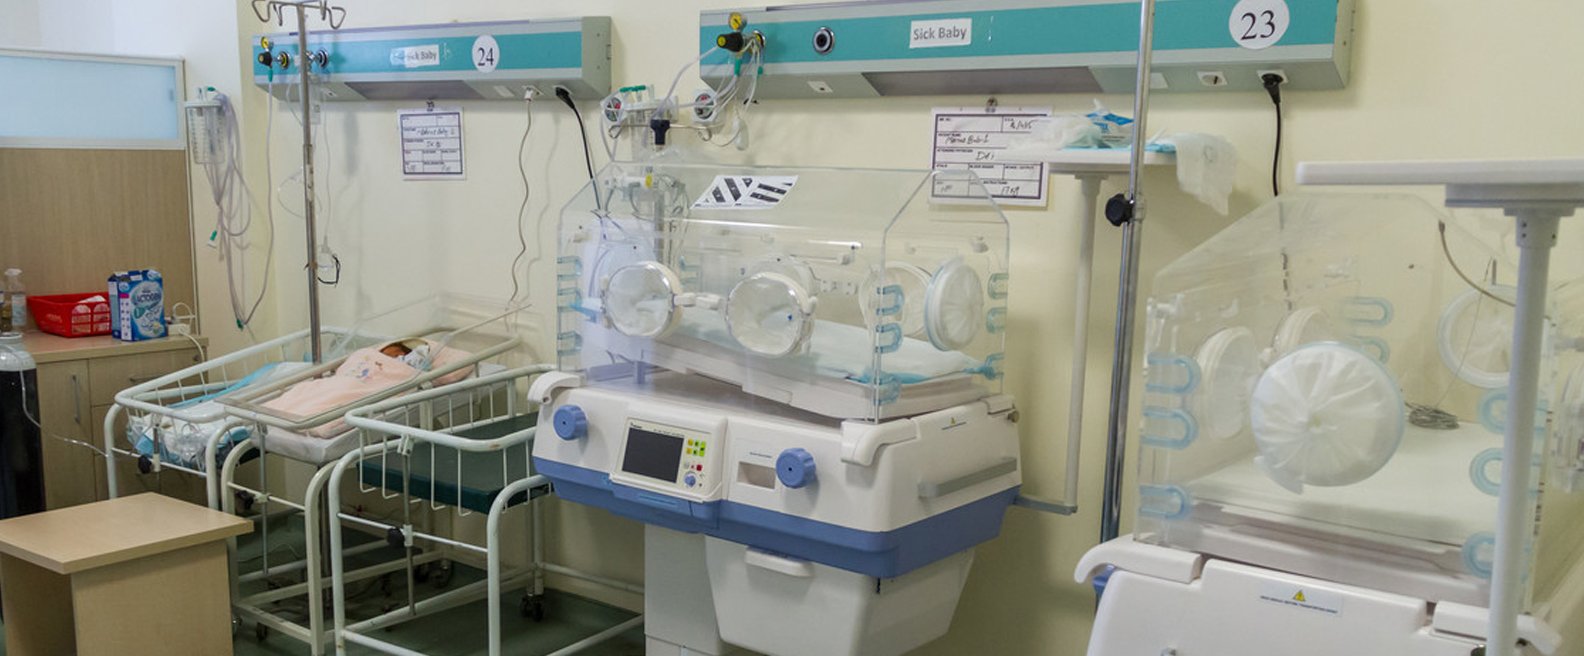 Neonatal Intensive Care Unit at Indus Hospital’s Shaikh Saeed Memorial Campus, Karachi operationalized through PPL’s support